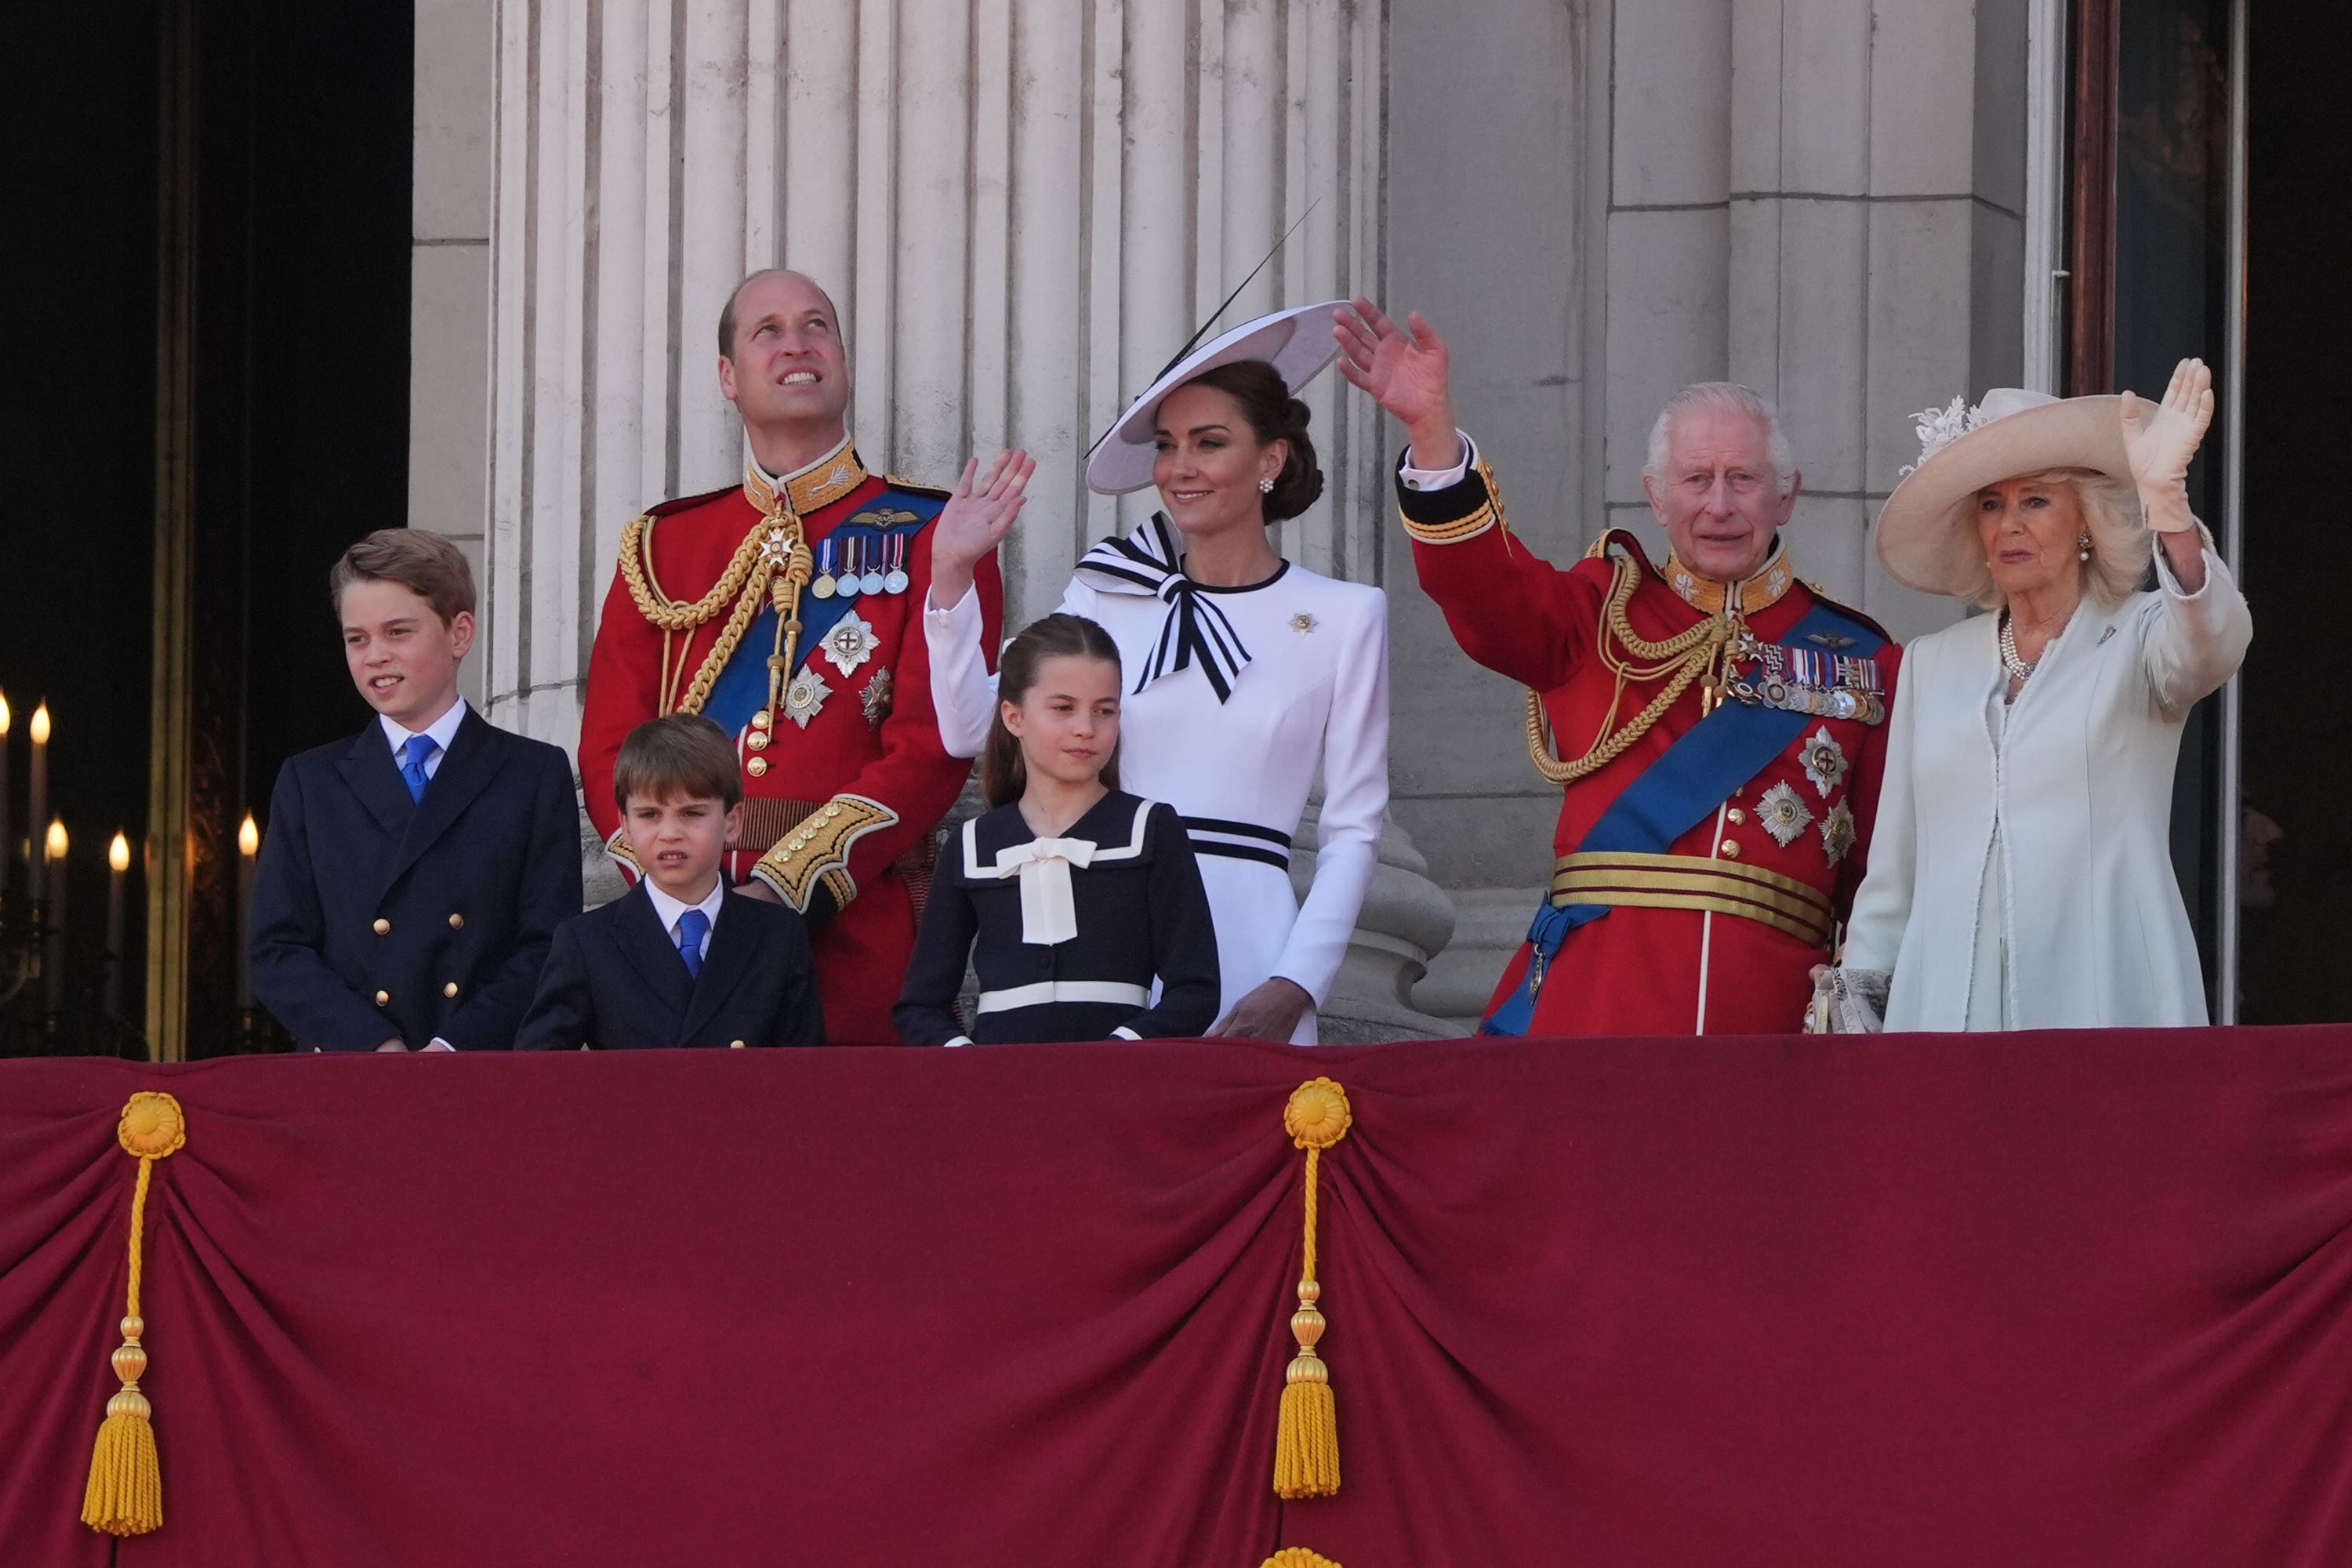 The Prince and Princess of Wales with their children, Prince George, Prince Louis, and Princess Charlotte, and King Charles III and Queen Camilla, on the balcony of Buckingham Palace.